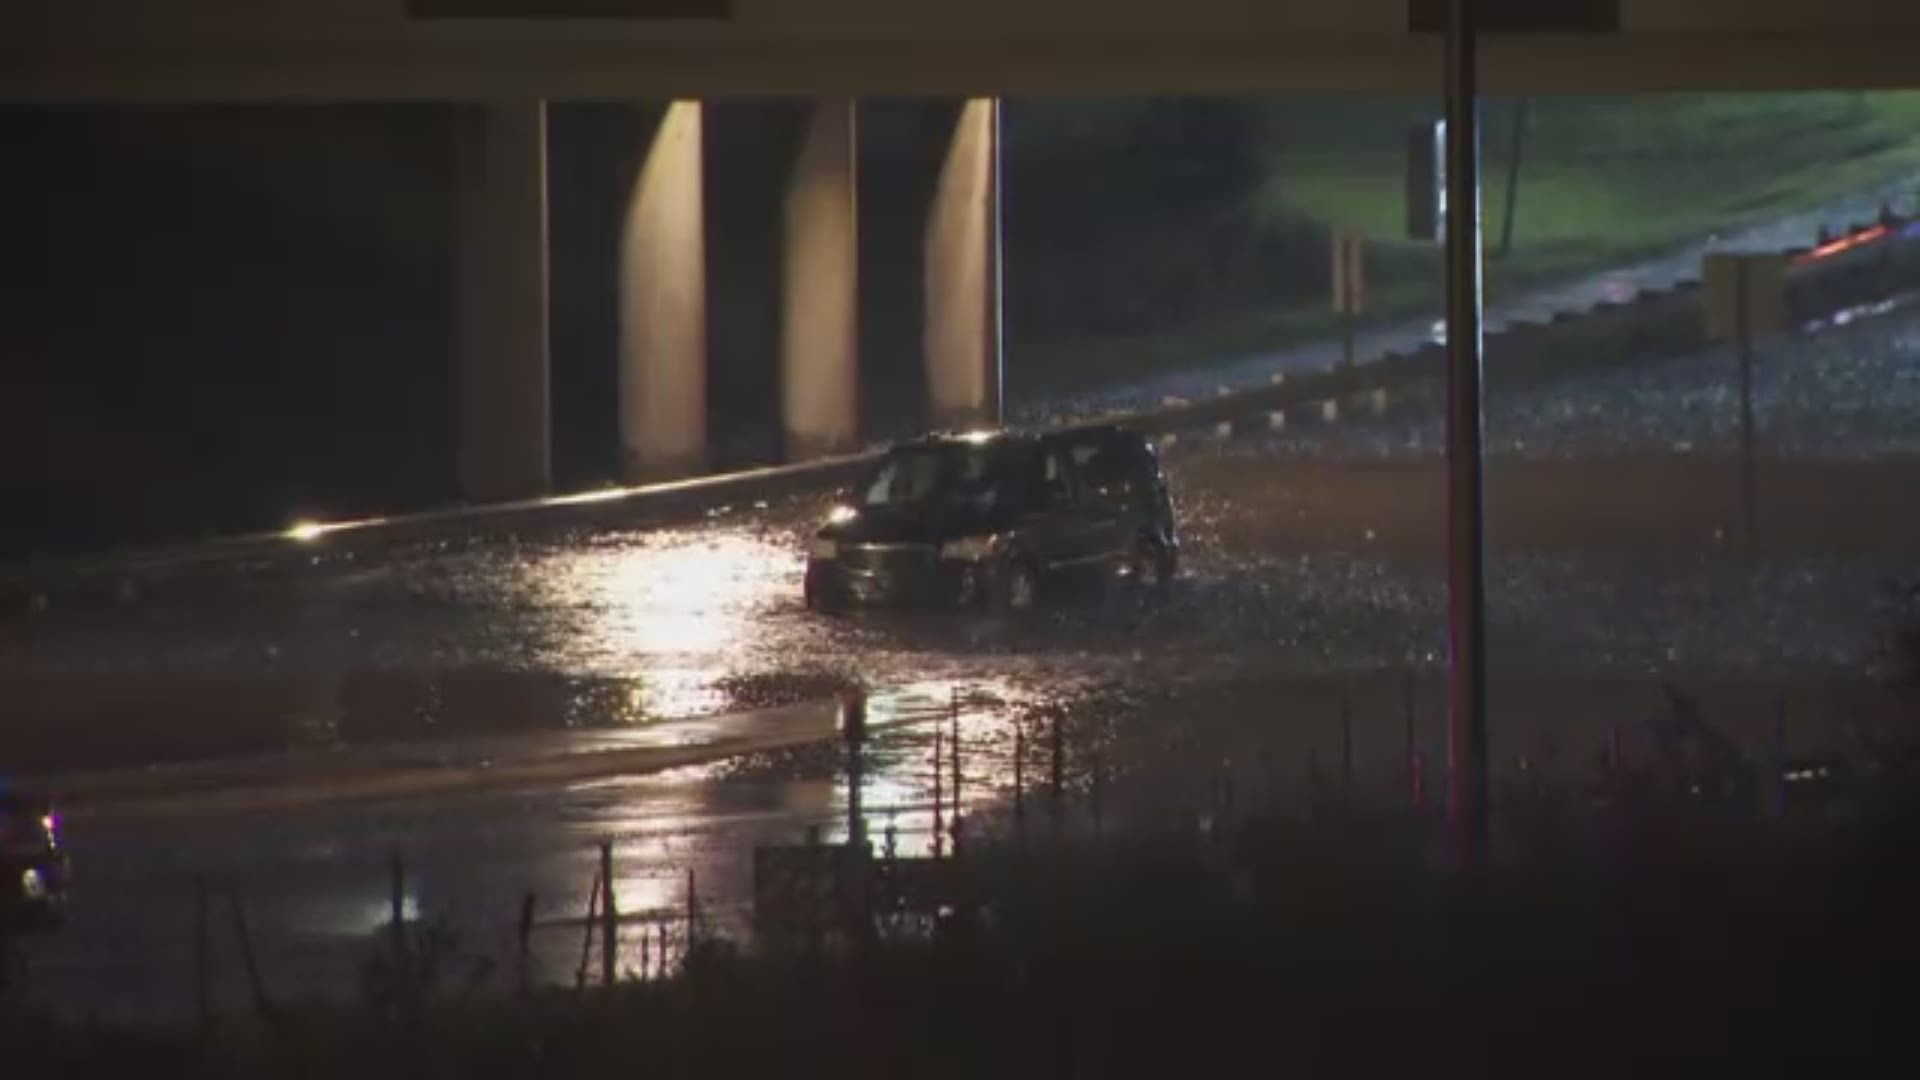 Flooding video on Fairview Ave. in Roseville, which is where Fairview Ave. travels under Highway 36.